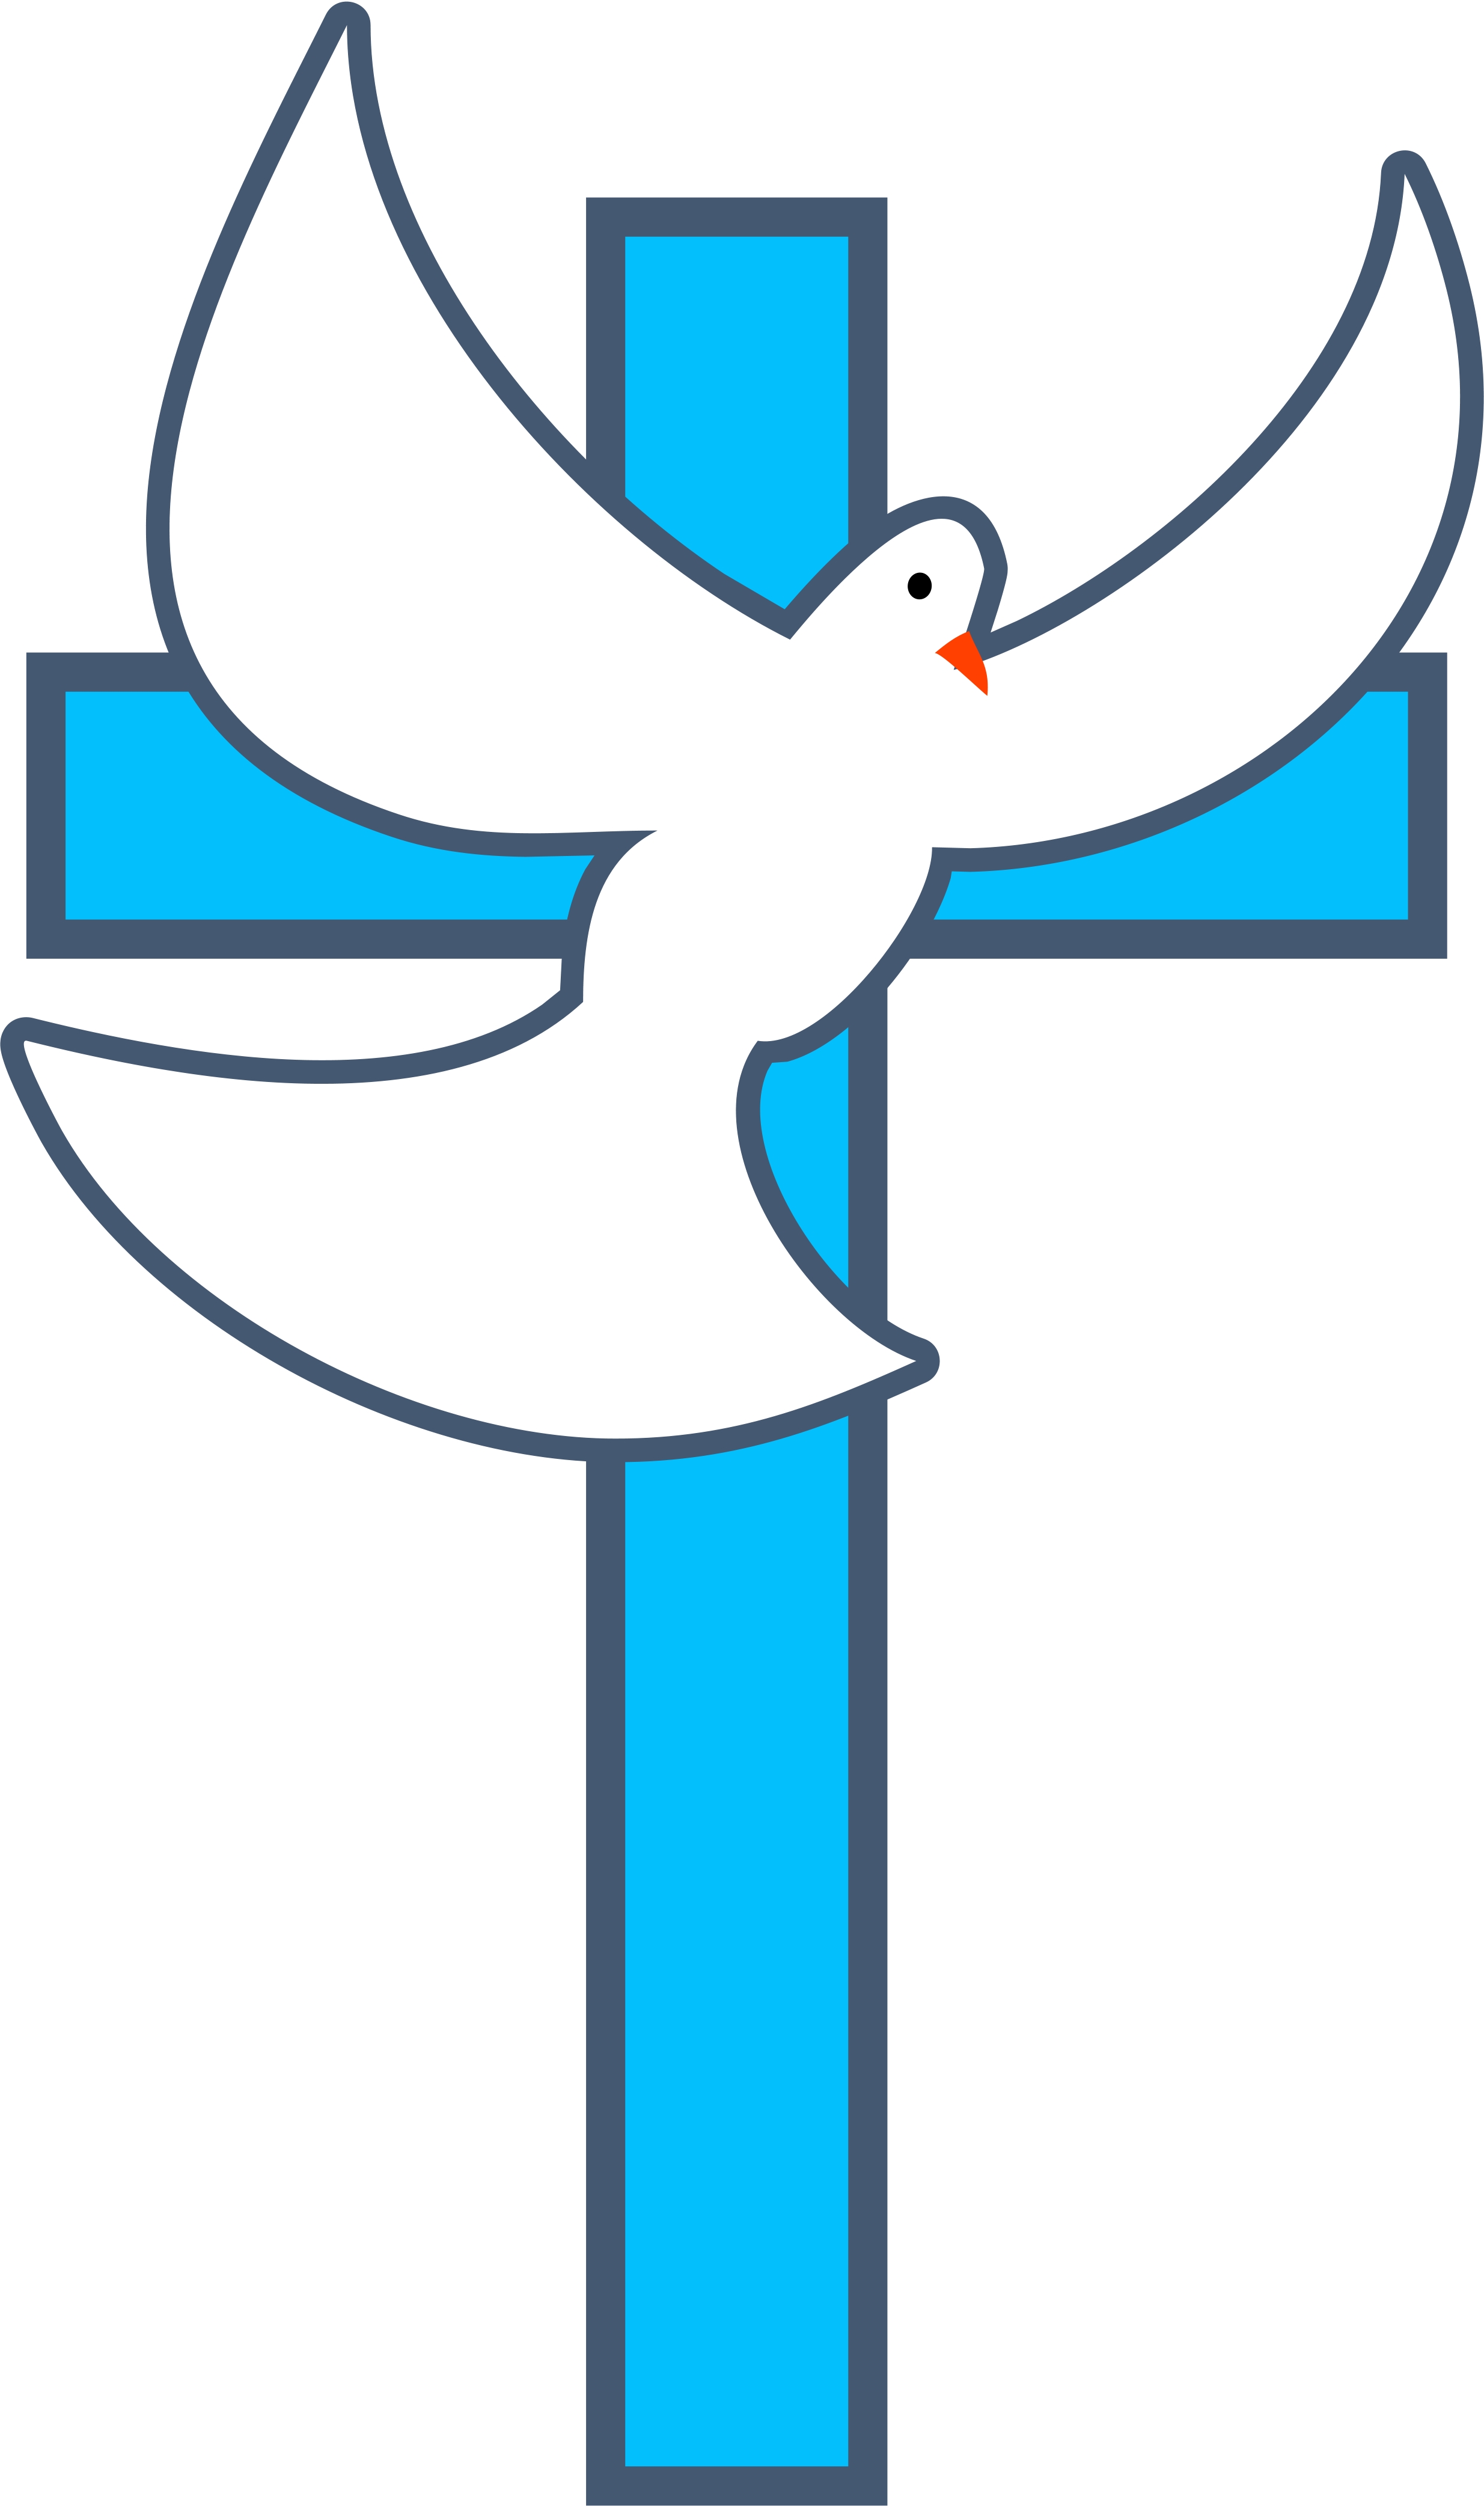 Clip Arts Related To : dove holy spirit symbol. 